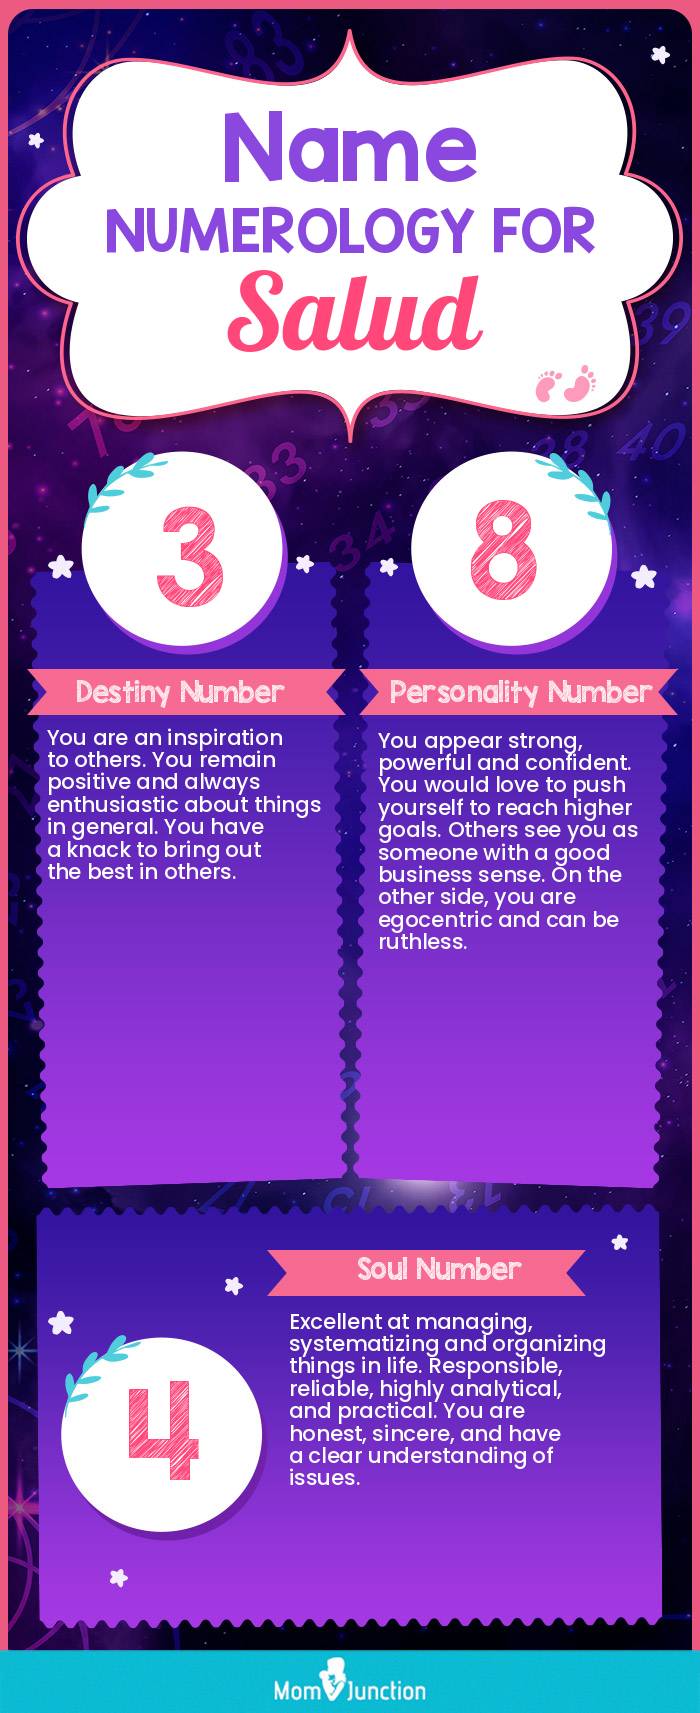 name-numerology-for-salud-girl